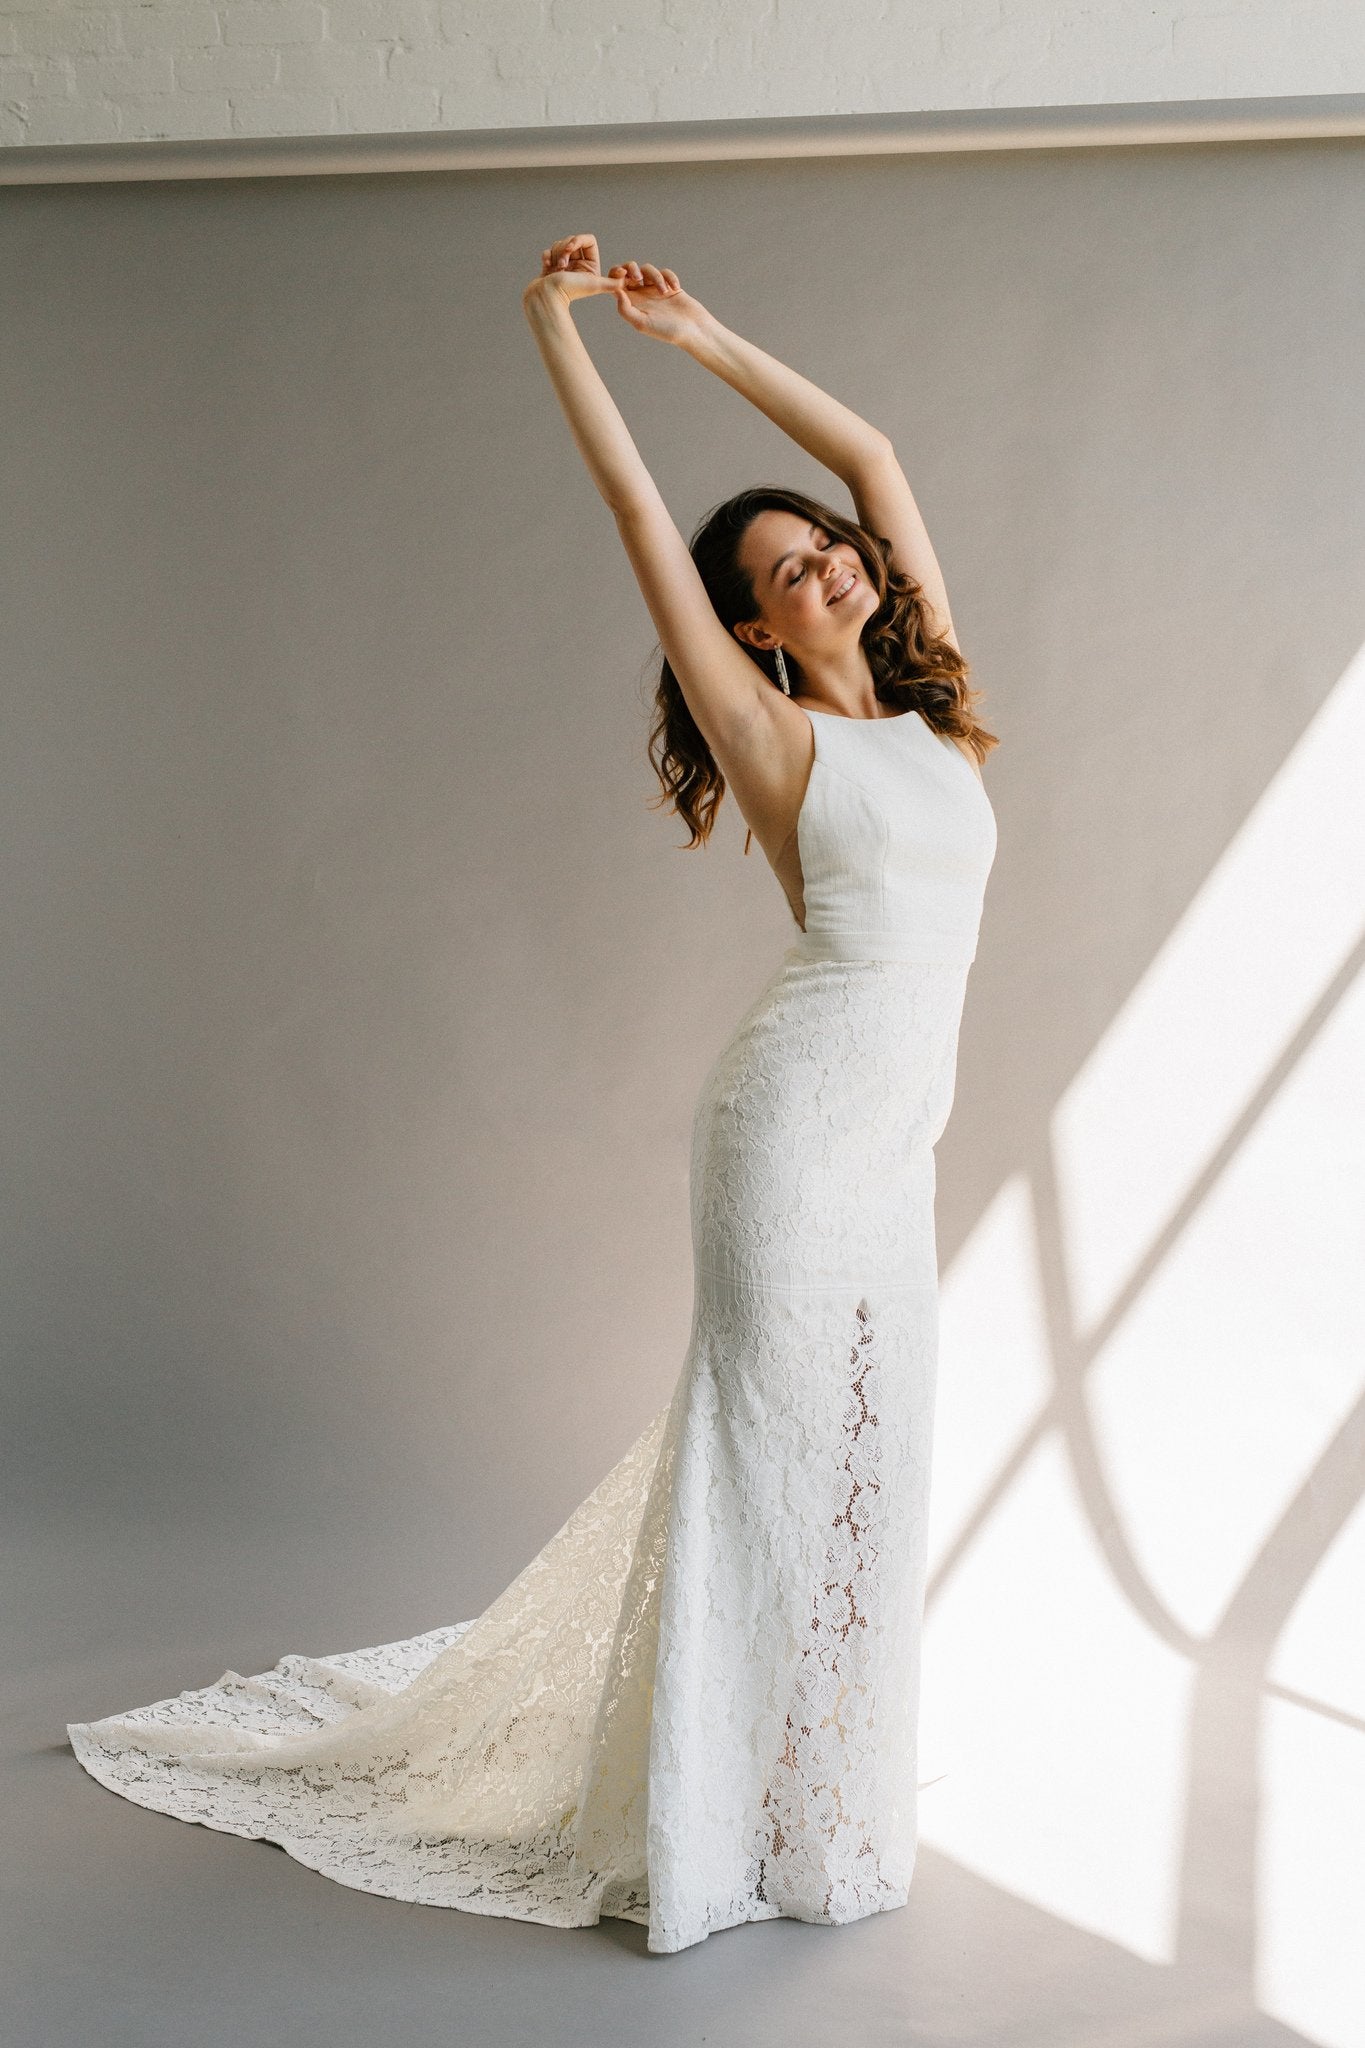 A high neck wedding dress with a low back, built-in bow, and a lace mermaid skirt with a hidden slit